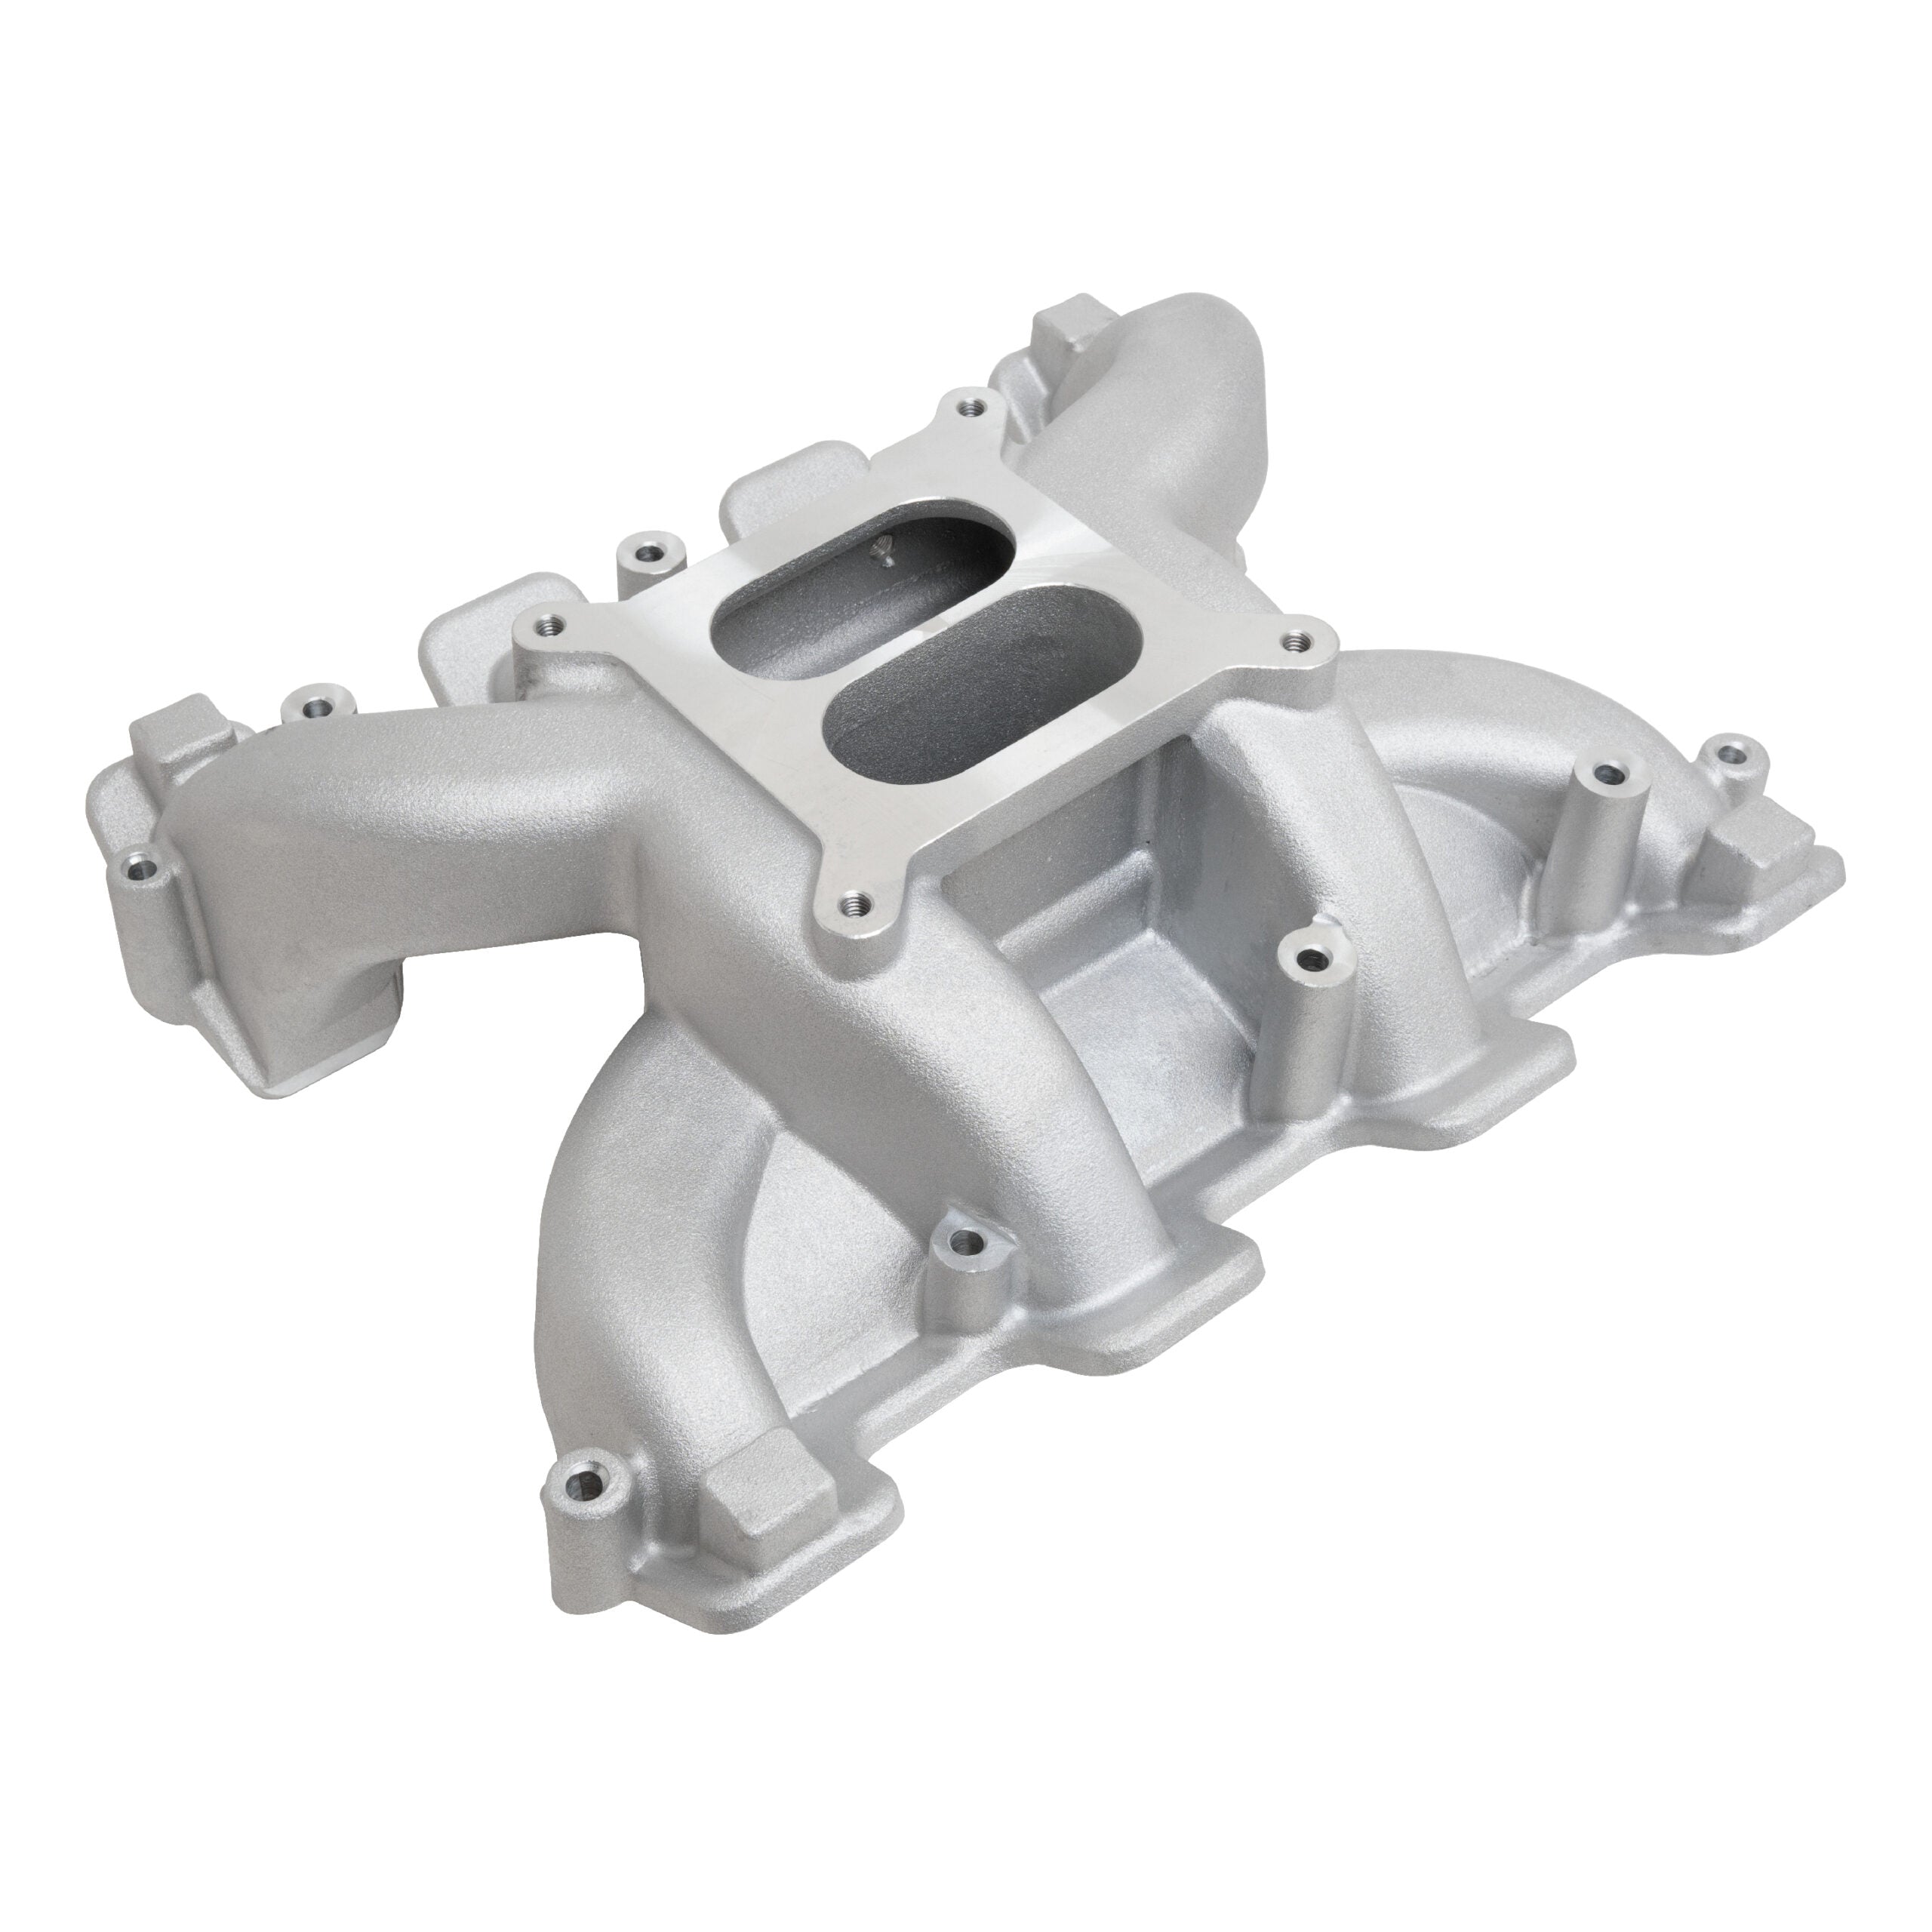 52087 Hurricane Carb Style Manifold for LS3 and L92 - Satin